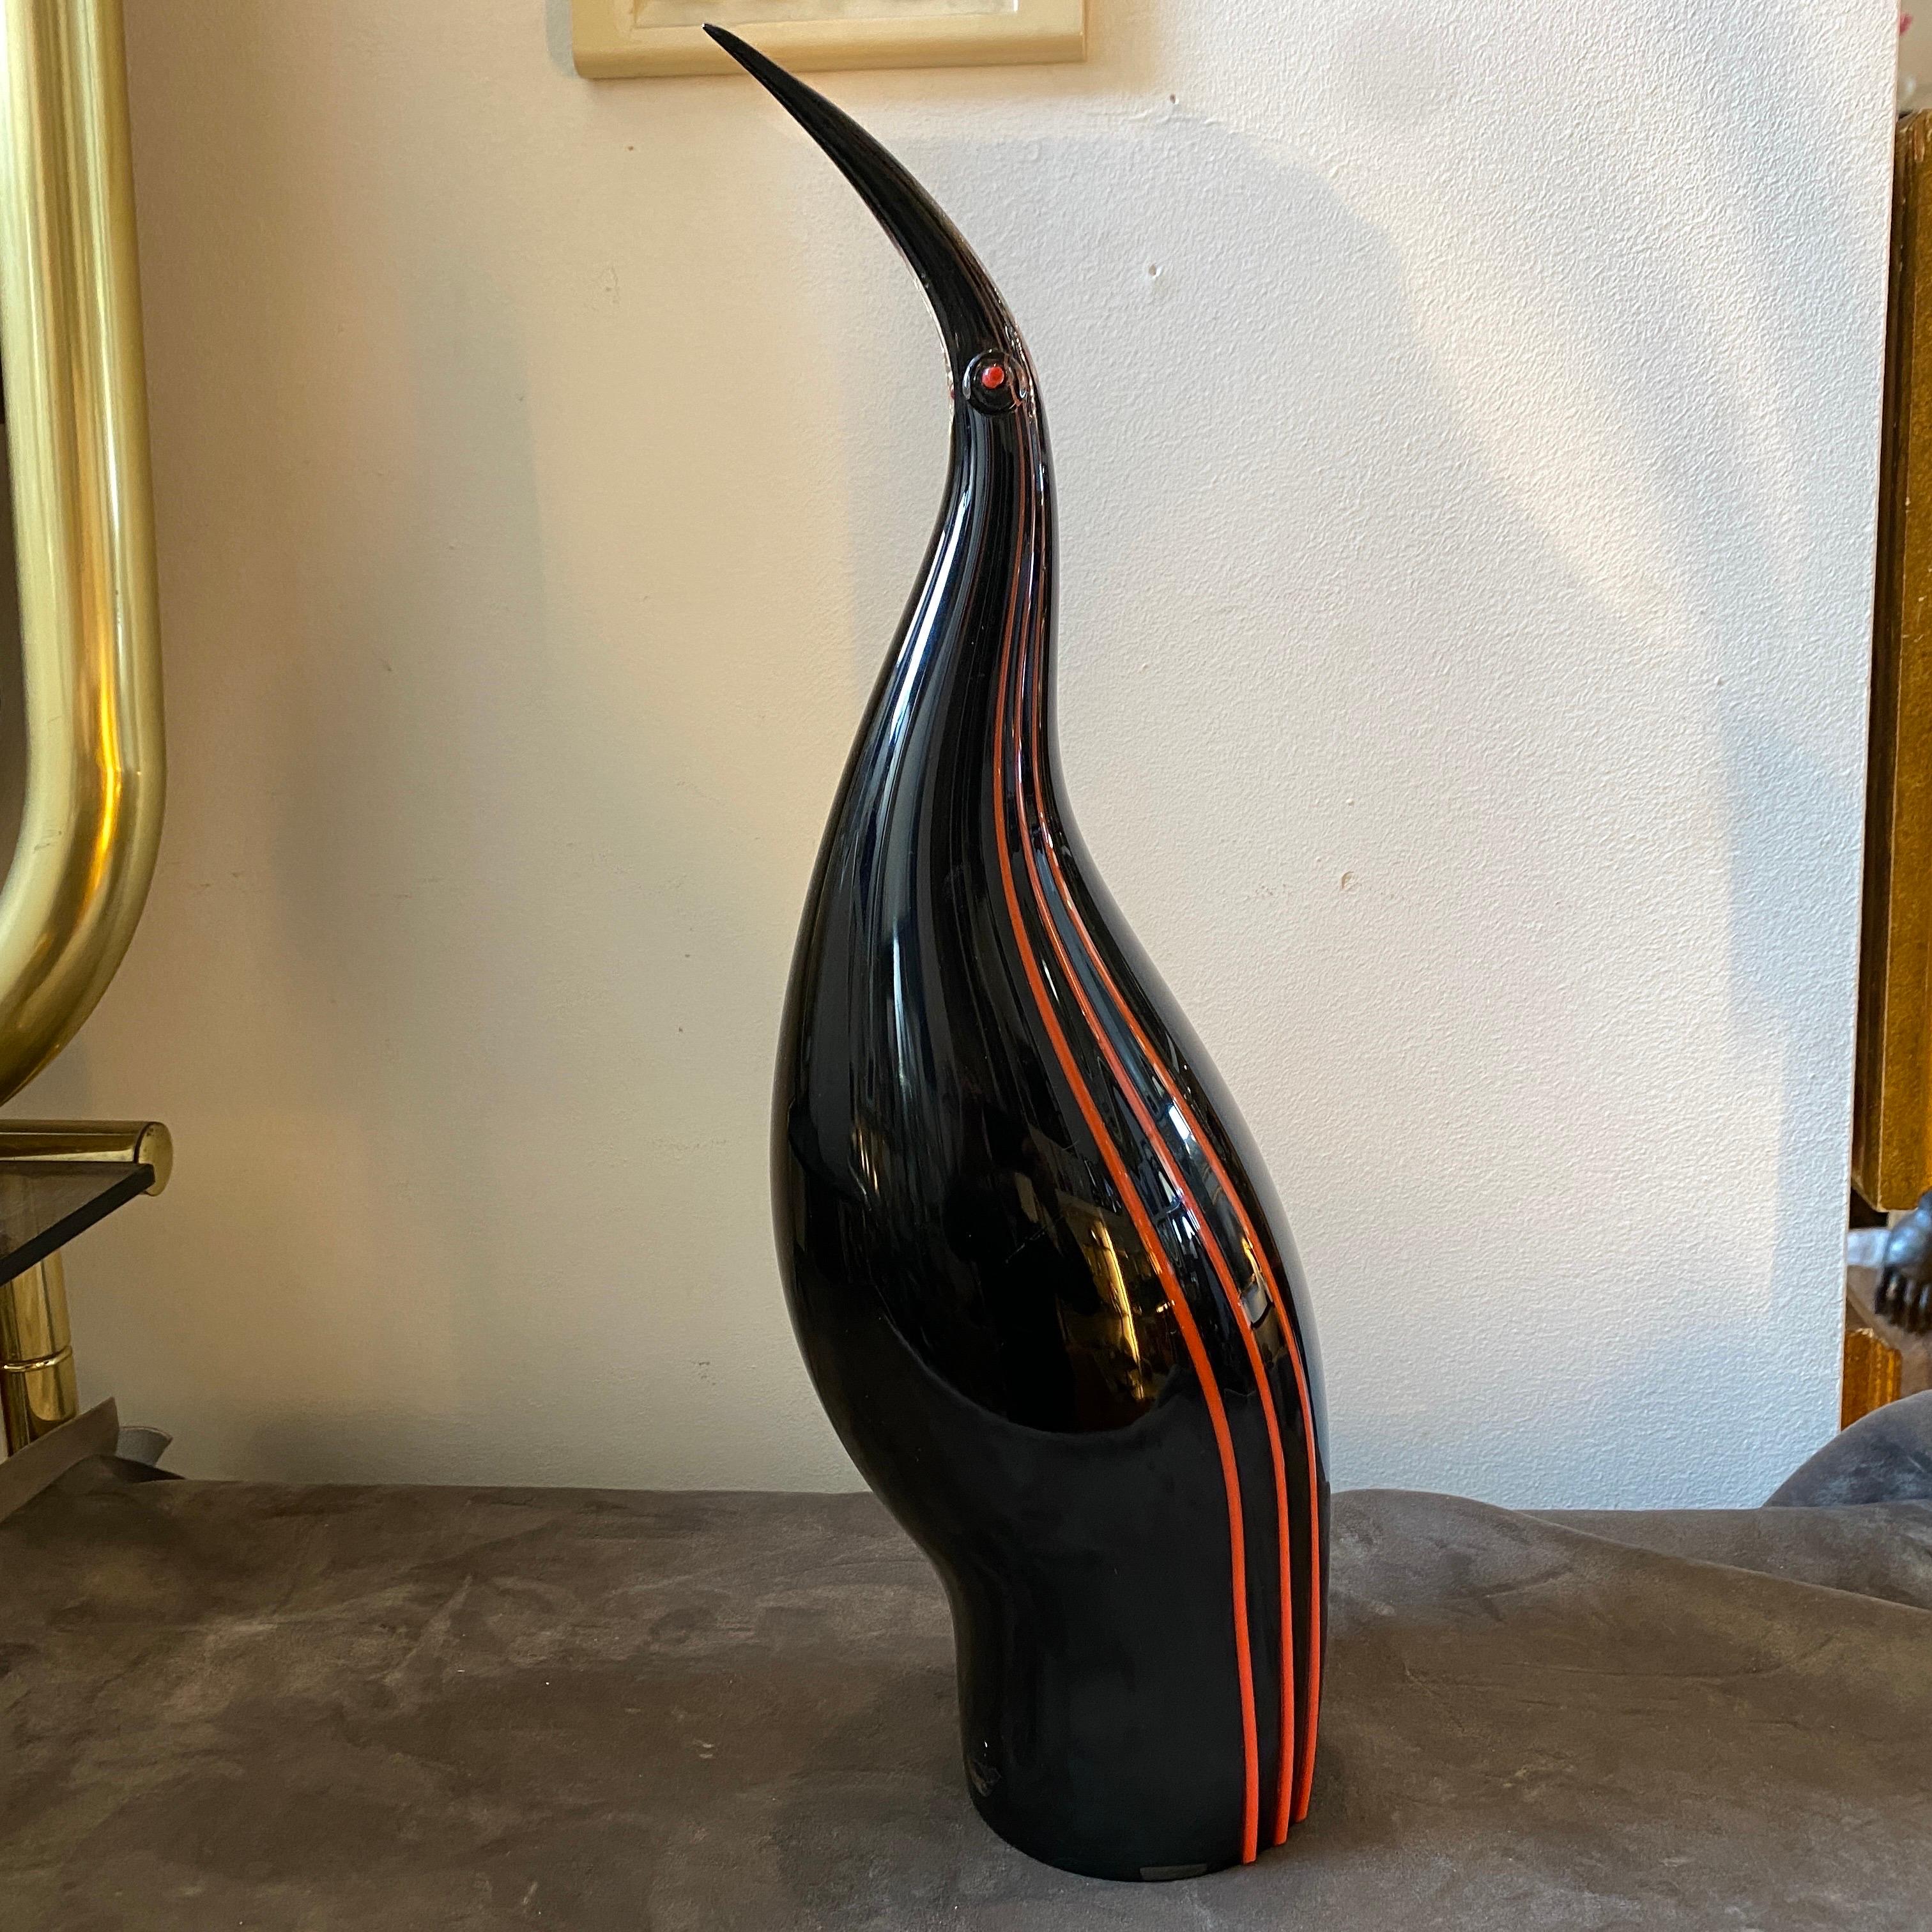 An amazing modernist sculpture of a Penguin designed and manufactured in Venice by Seguso. the red and black murano glass it's in perfect conditions, its acid signed on the bottom and labeled on a side. This Murano Glass Penguin is a striking piece